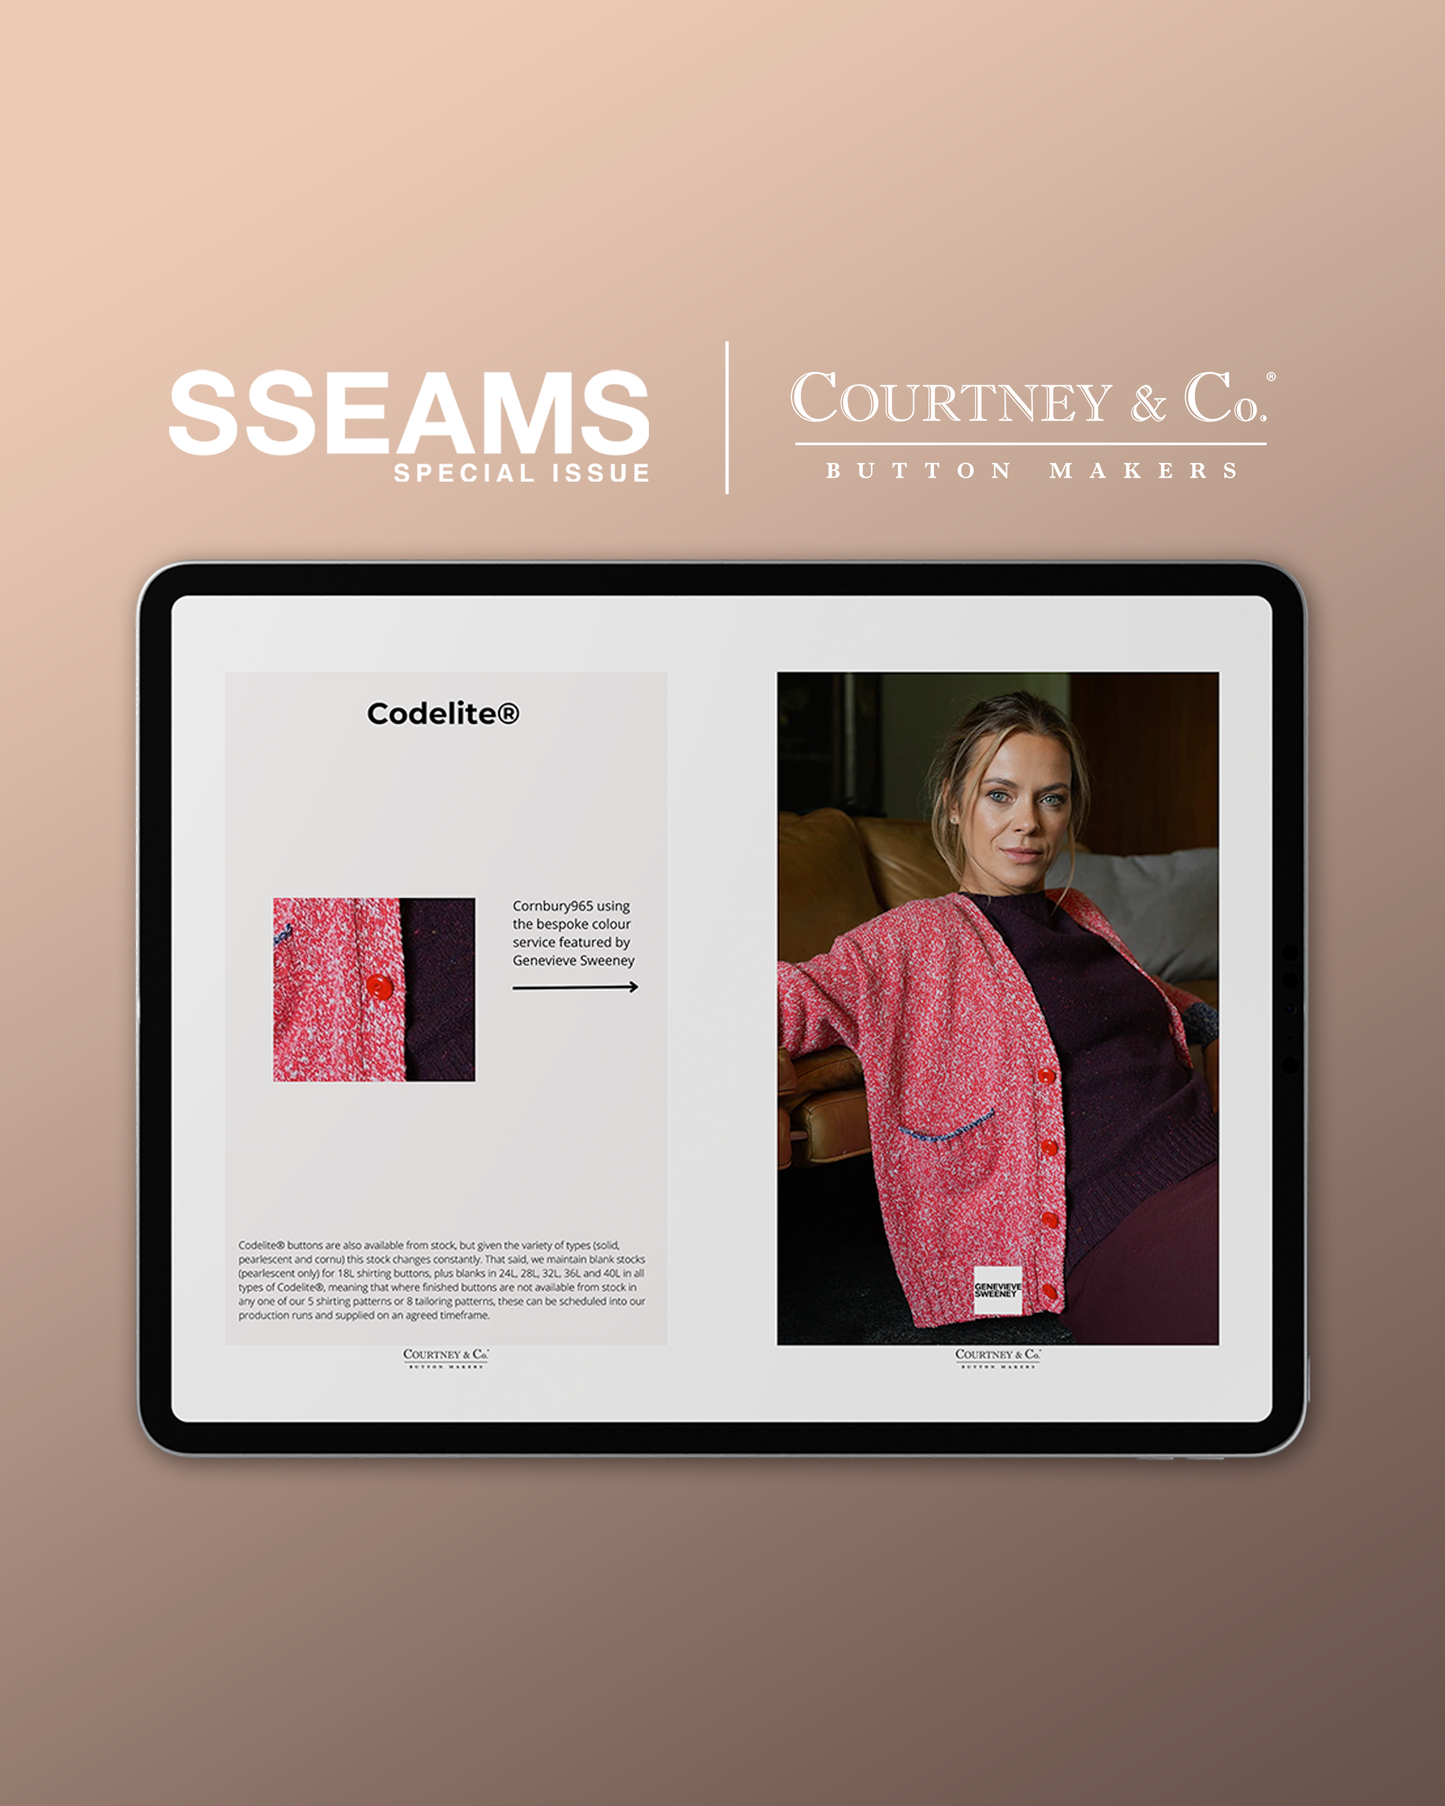 SSEAMS Special Issue - Courtney & Co.